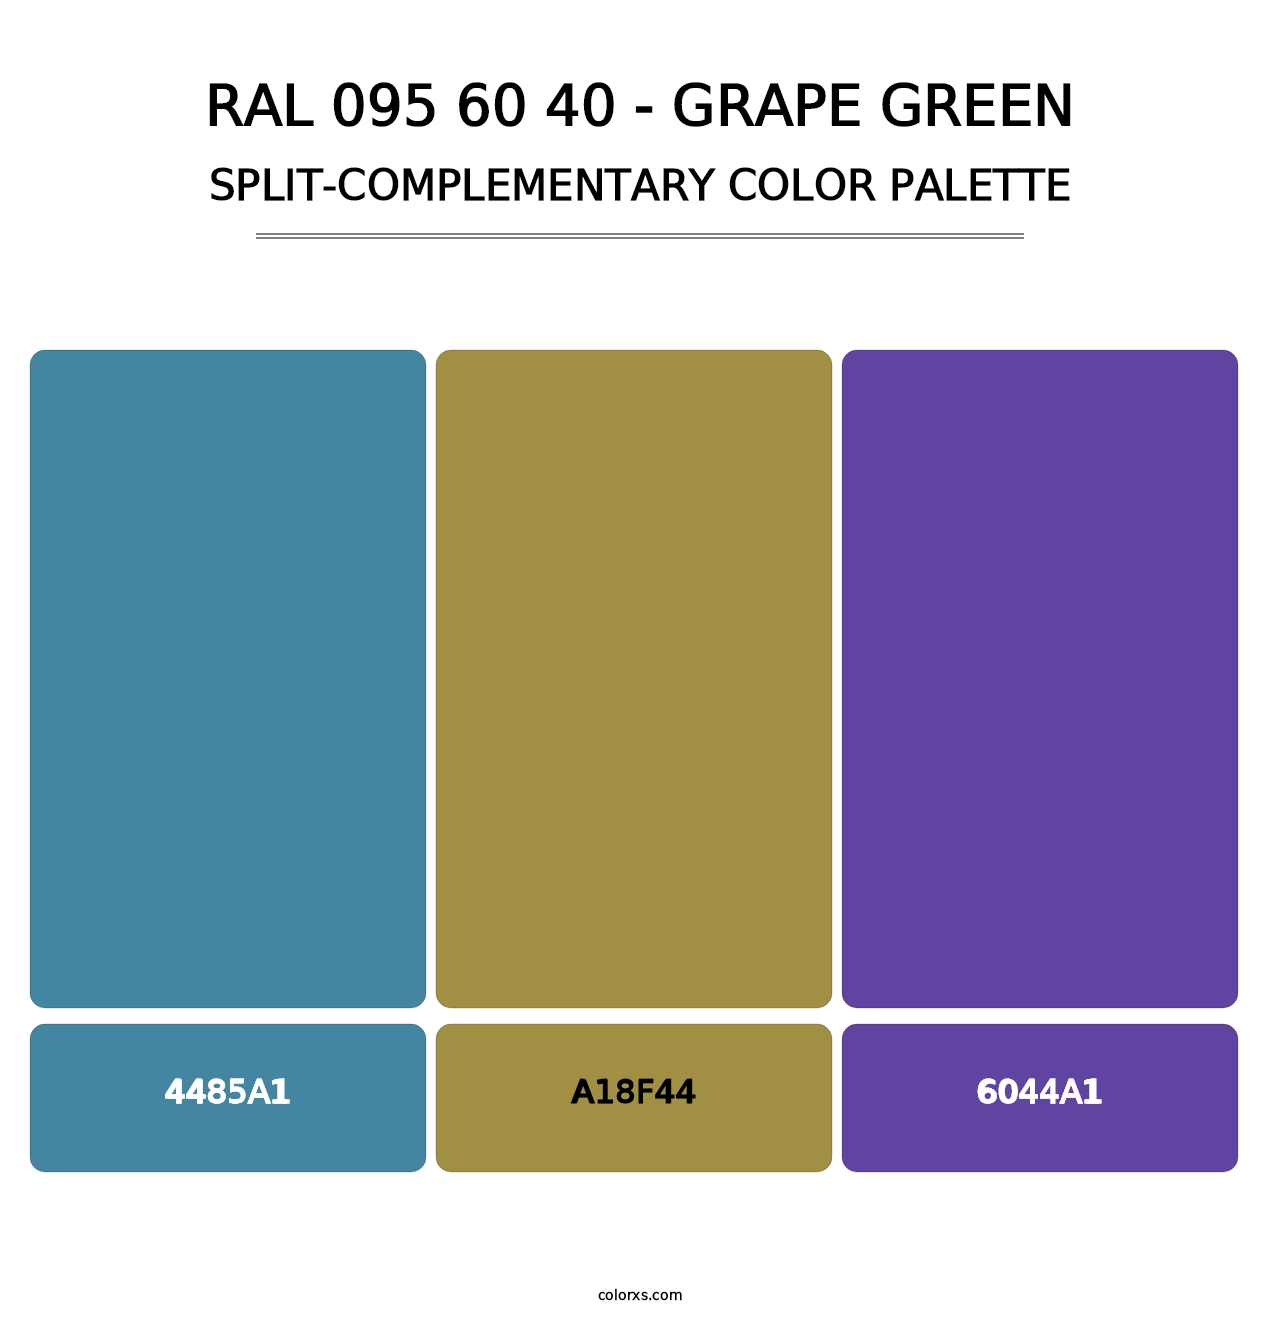 RAL 095 60 40 - Grape Green - Split-Complementary Color Palette